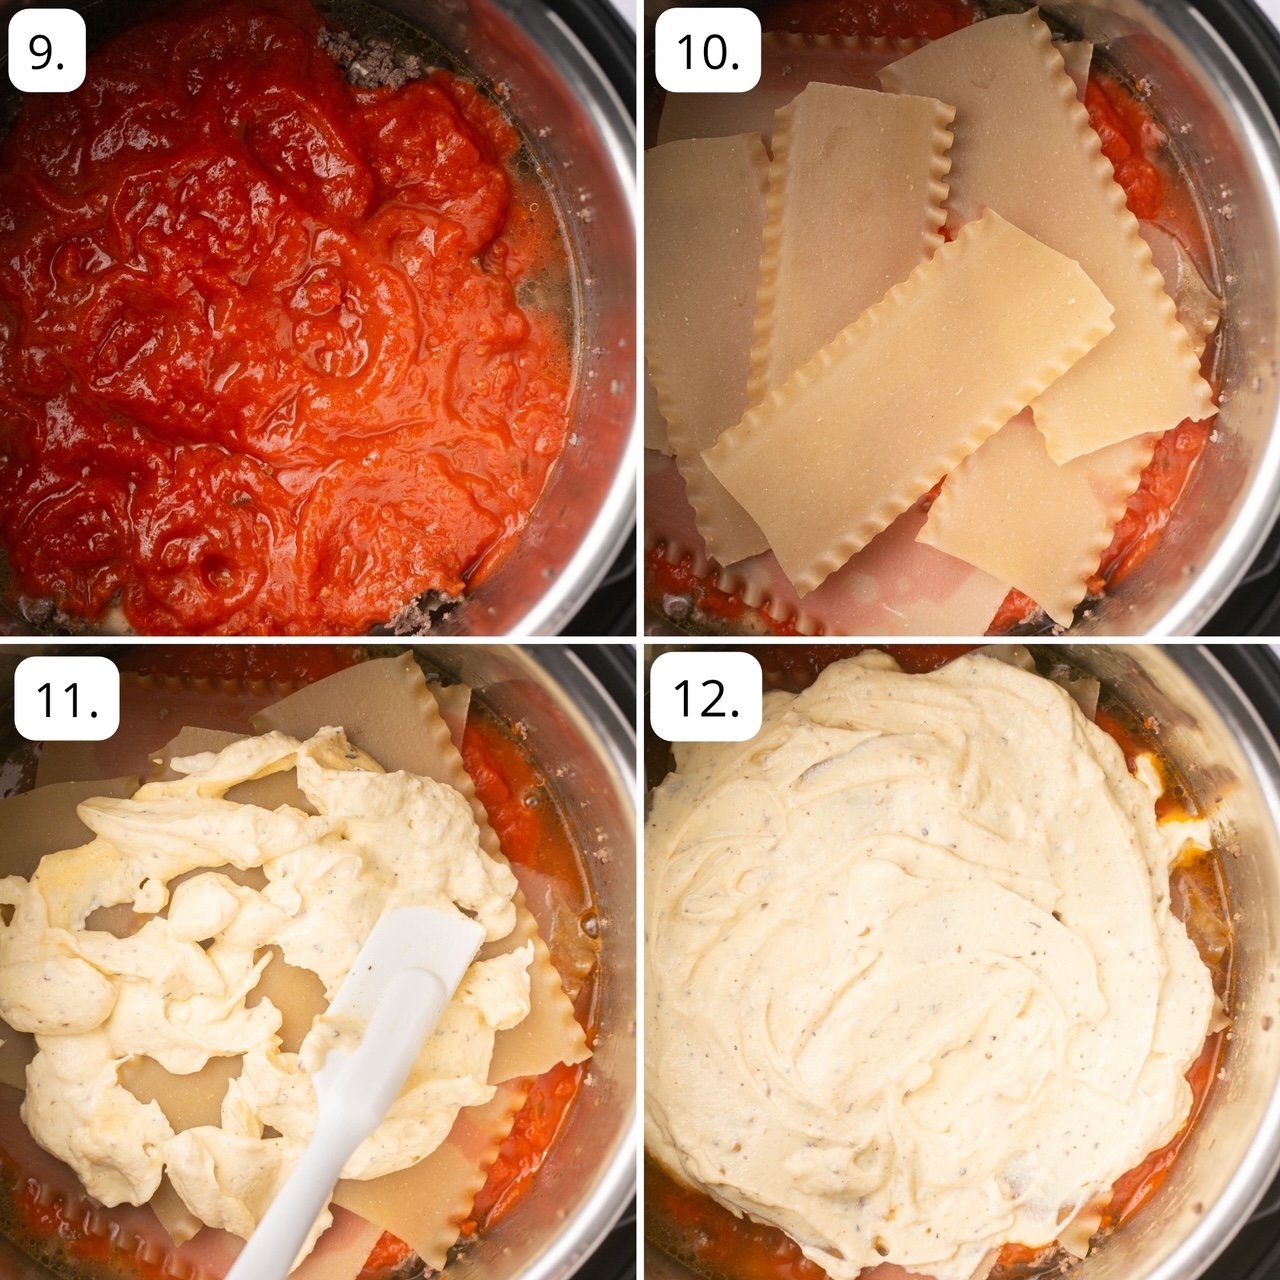 4 quadrants of photos showing how to layer the sauce, noodles, and cheese mixture